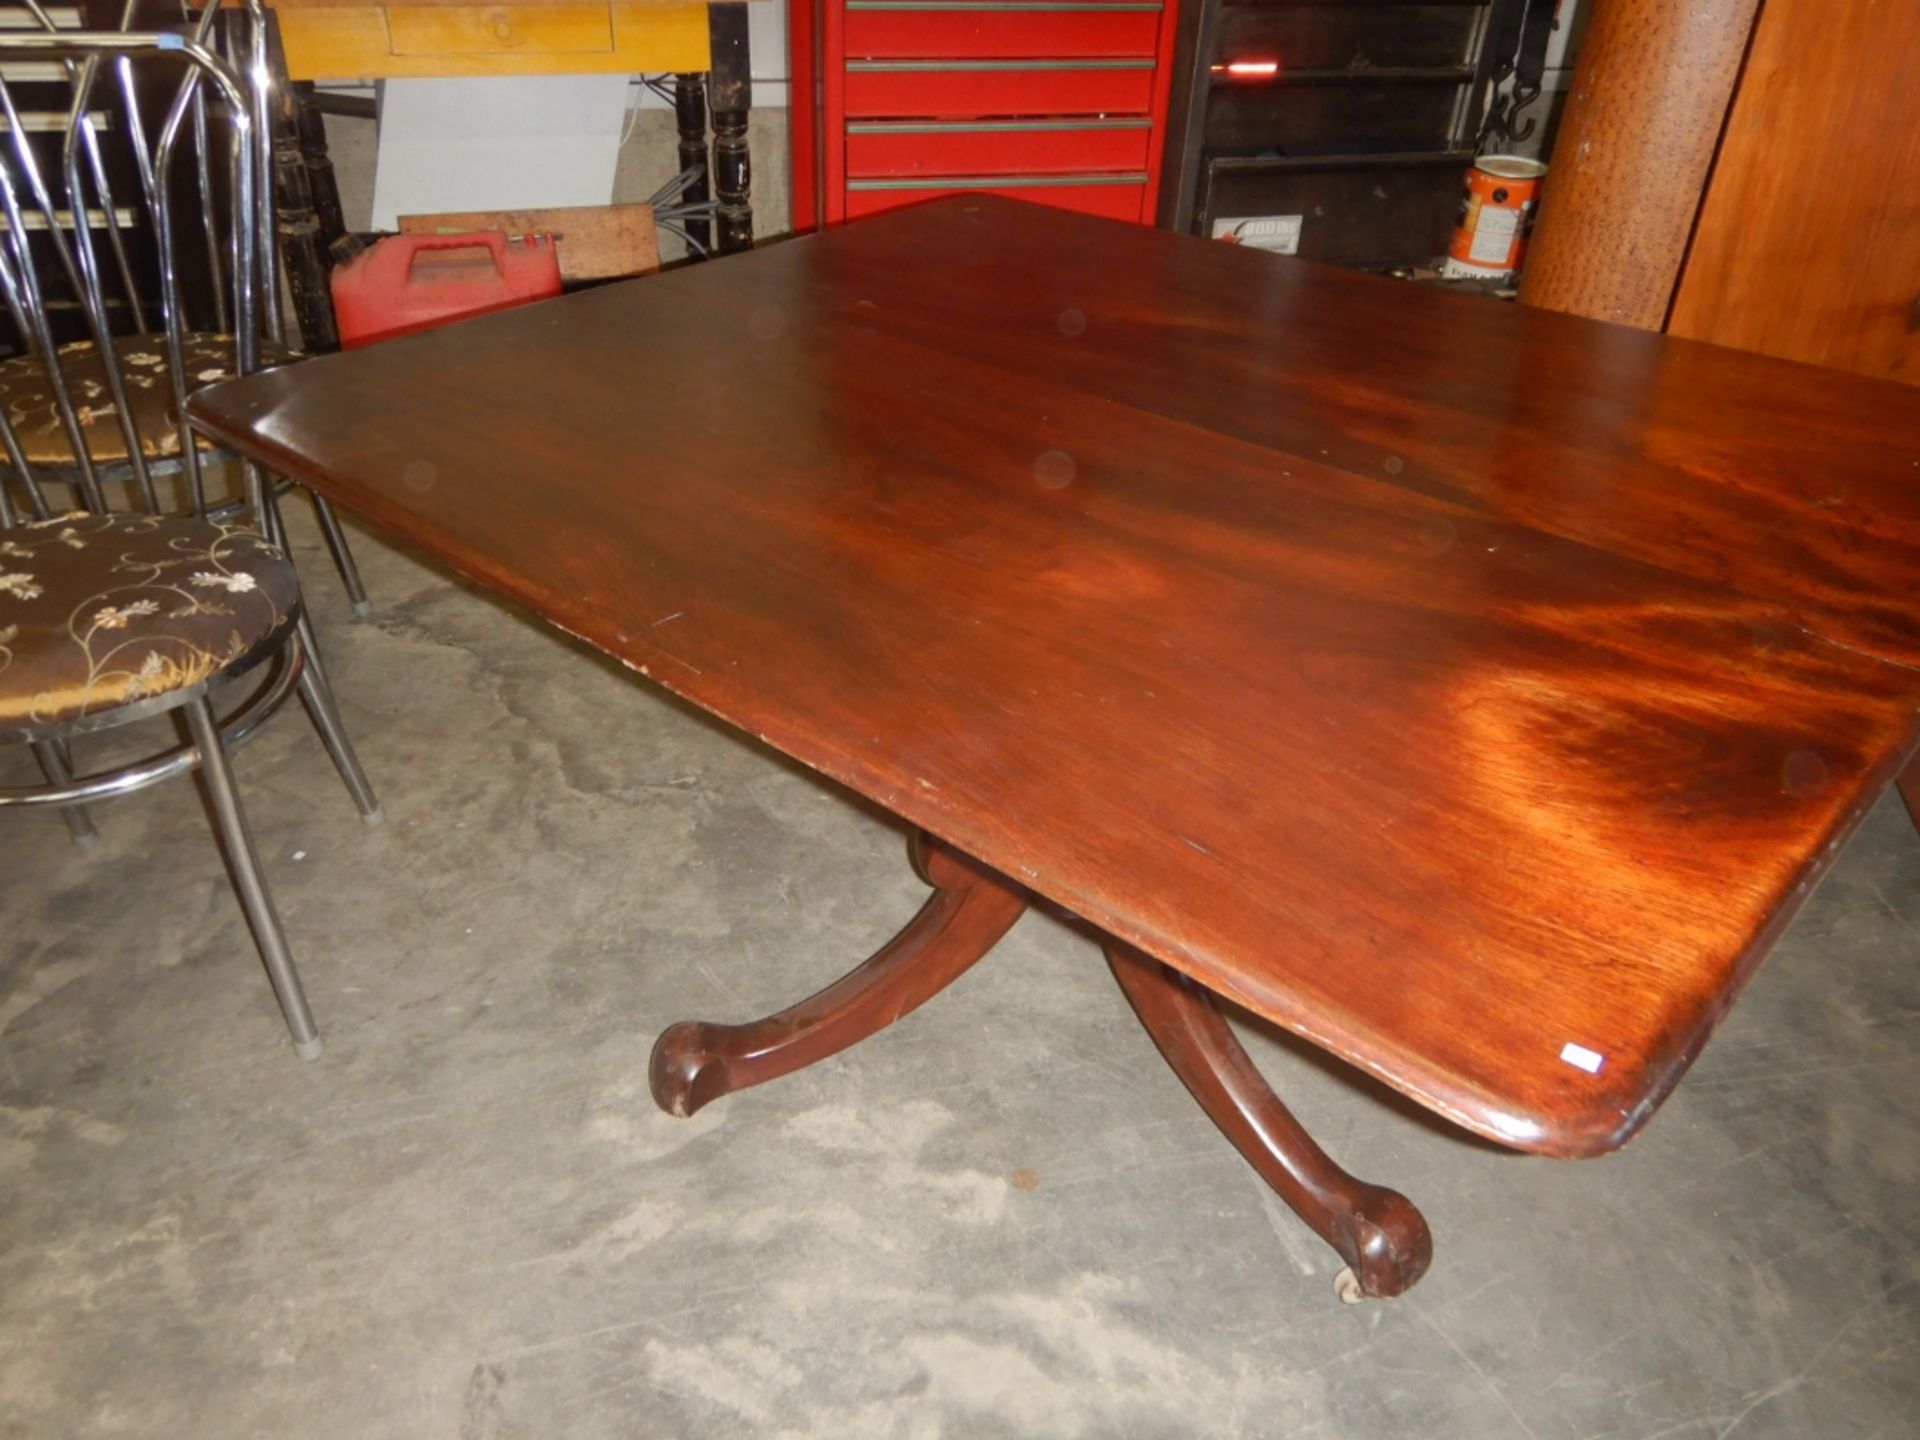 ANTIQUE WOODEN FOLDING TEA/DINING TABLE, 38"X46" - Image 4 of 5